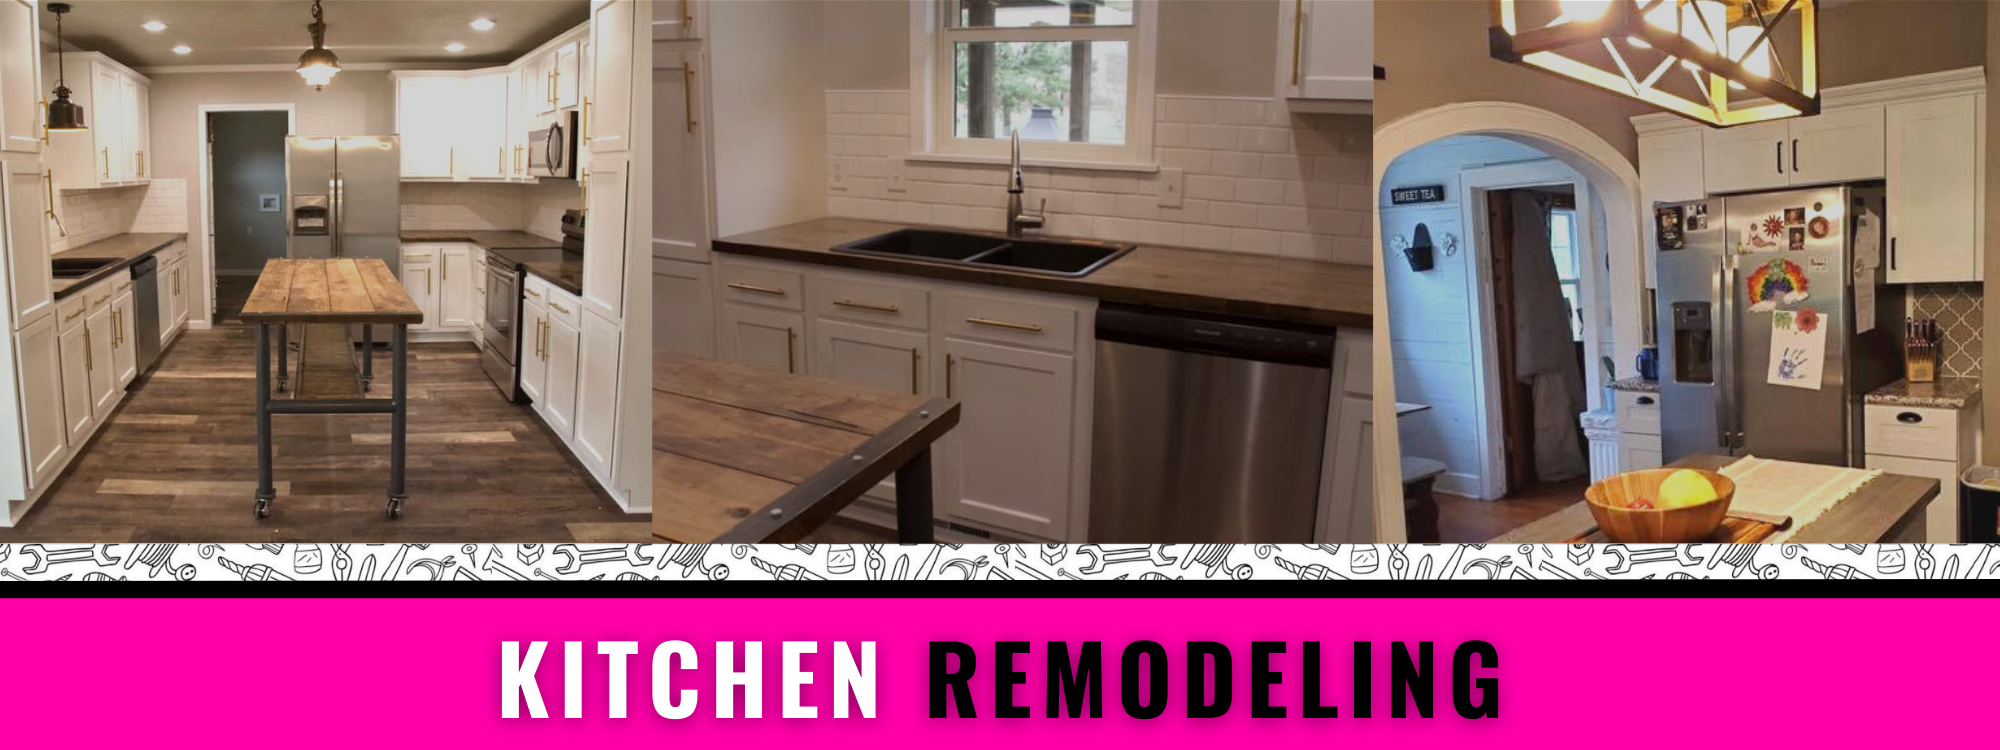 kitchen remodeling collage 